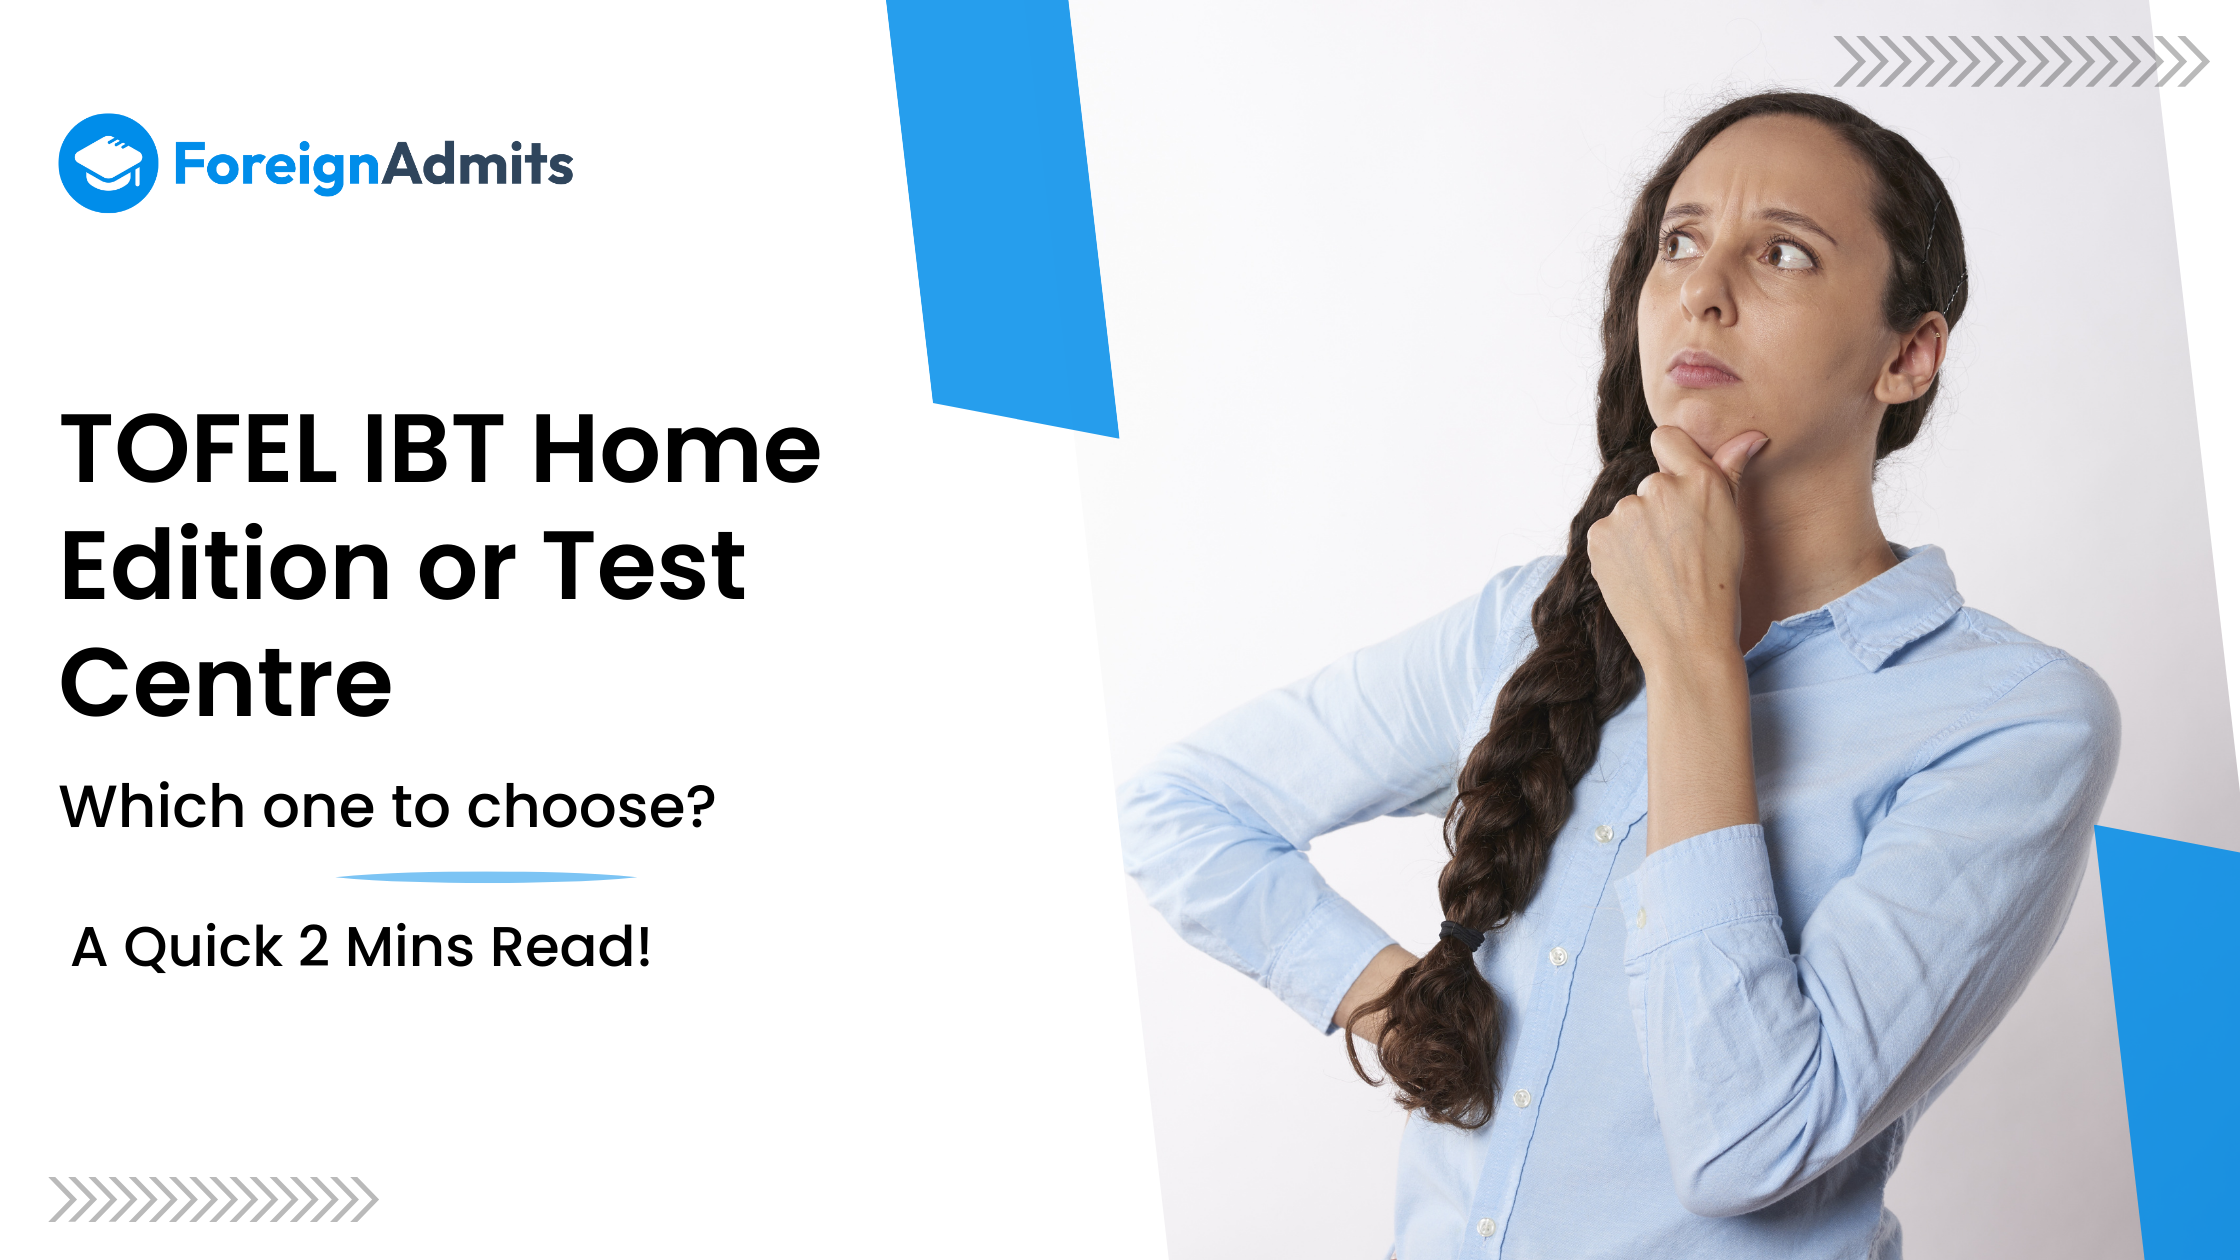 TOEFL iBT: Home Edition or Test Centre?